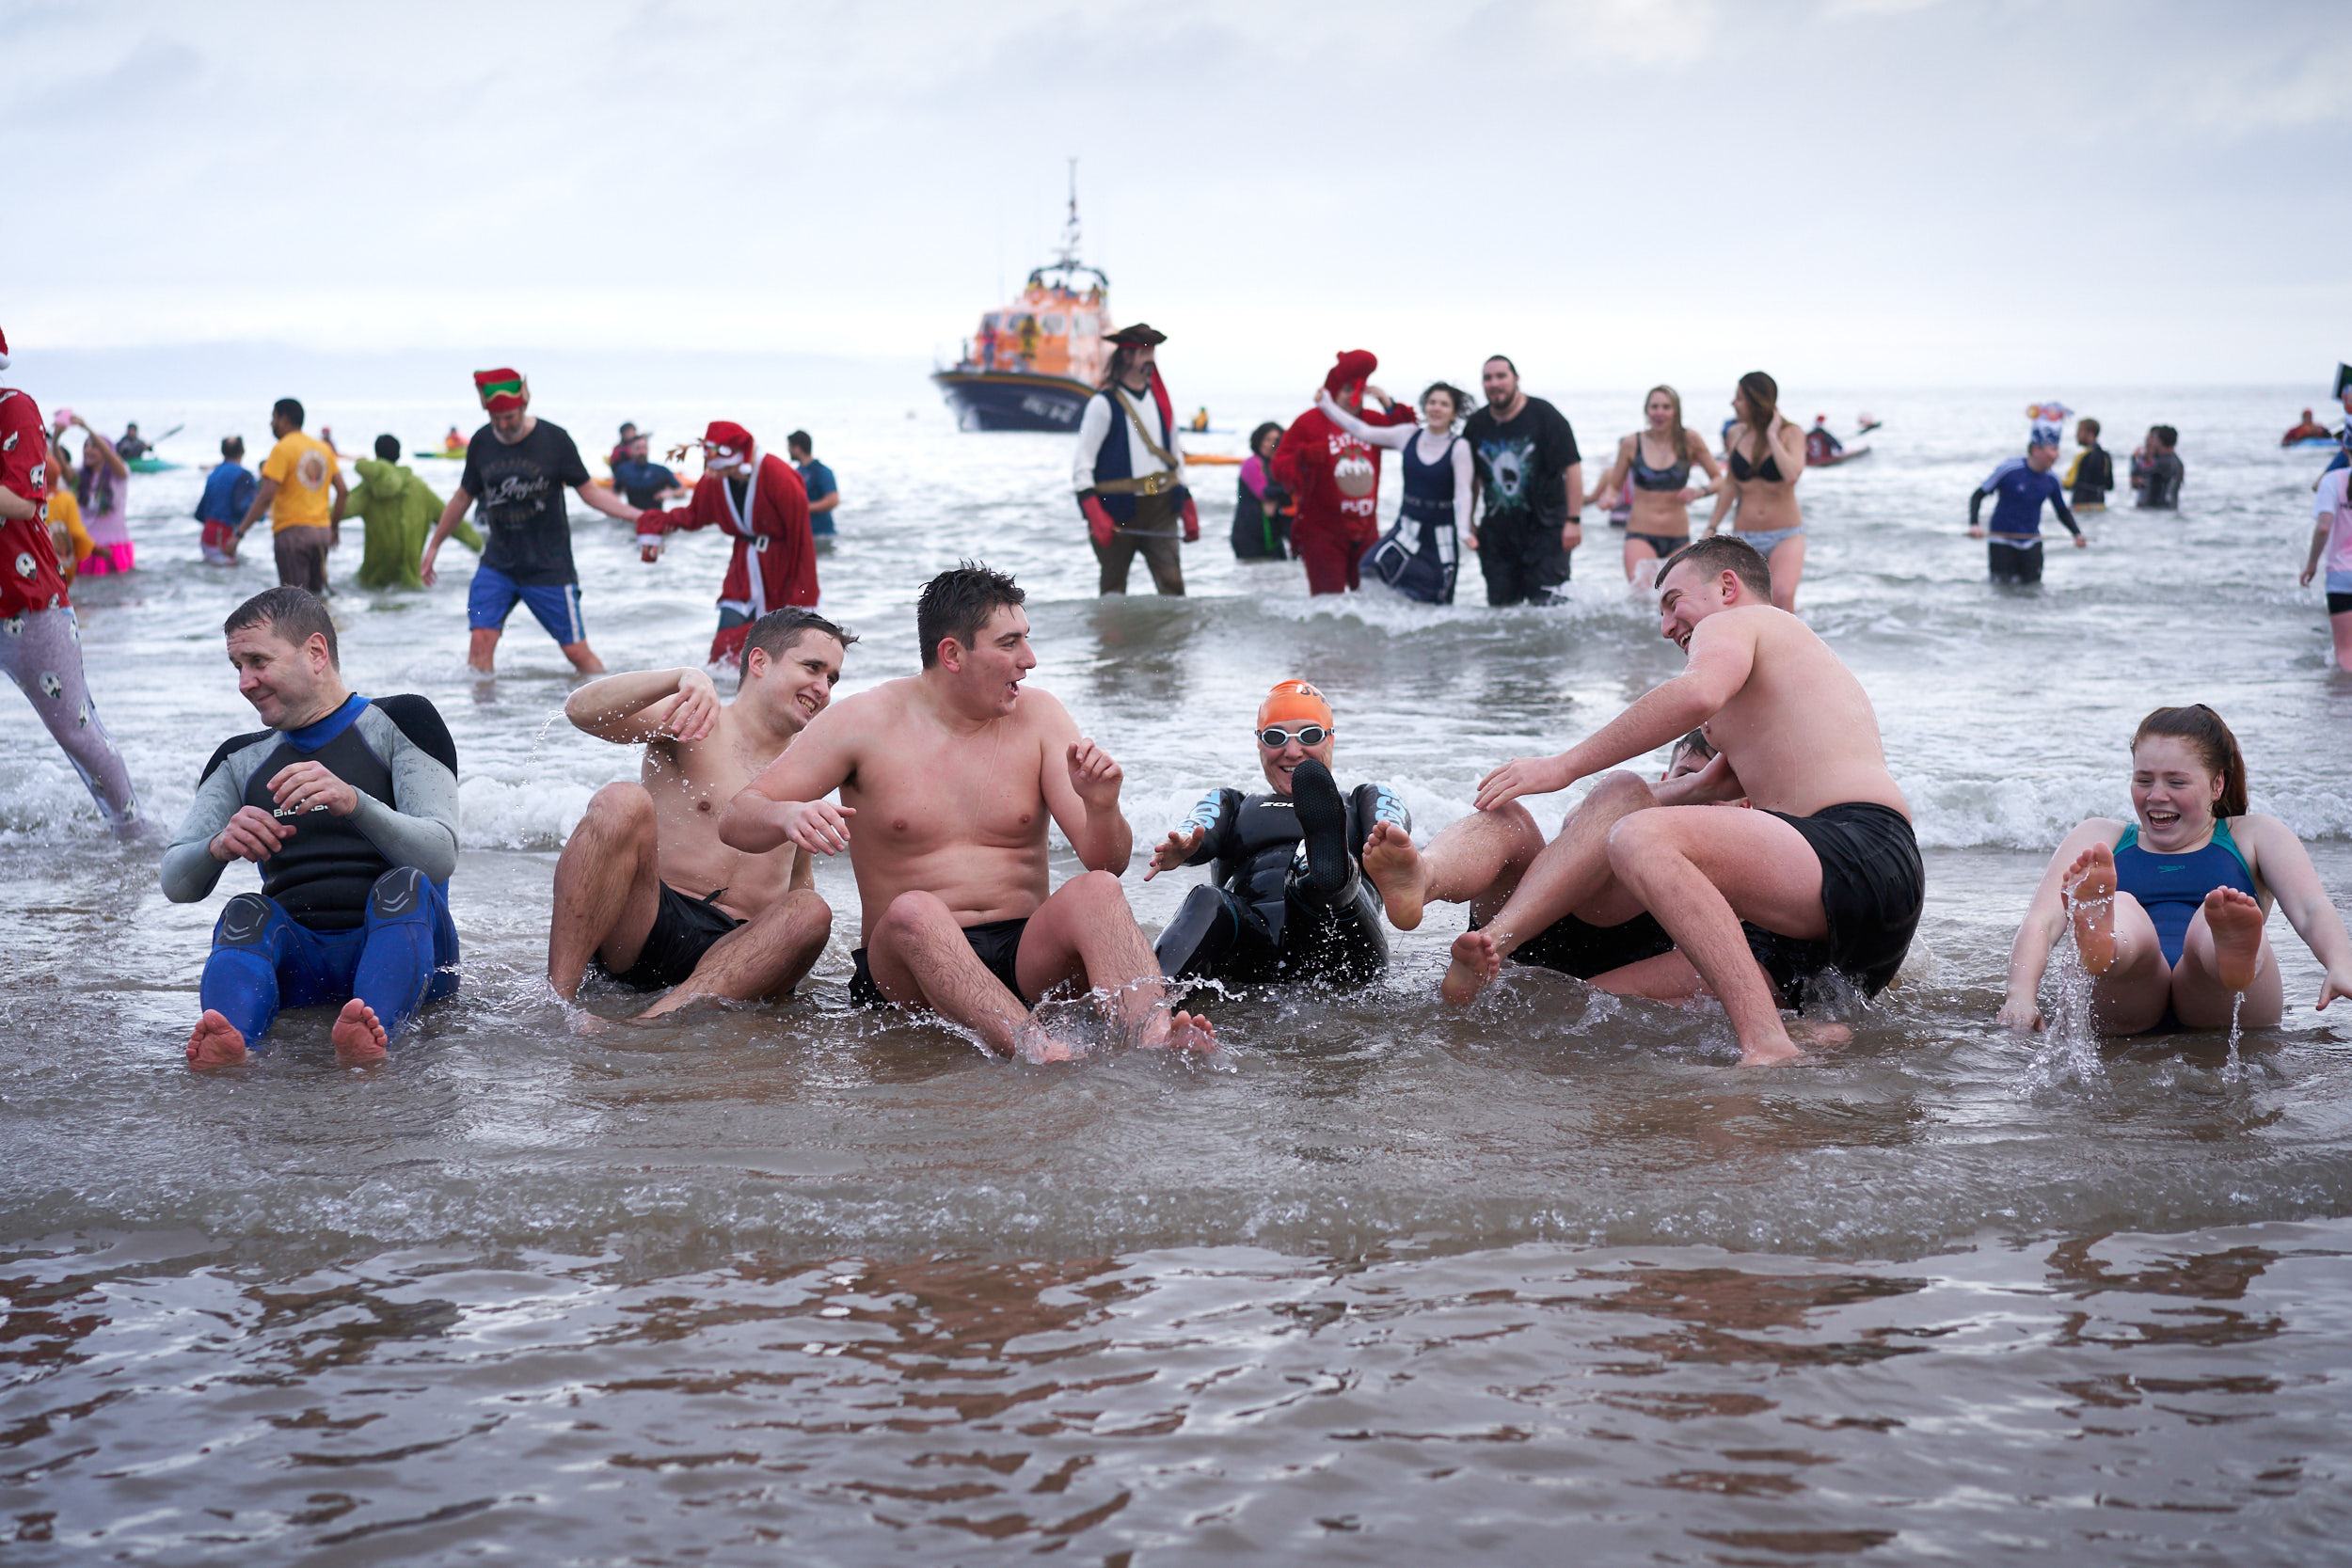 PARTICIPANTS POSE FOR A PHOTO DURING THE TENBY BOXING DAY SWIM